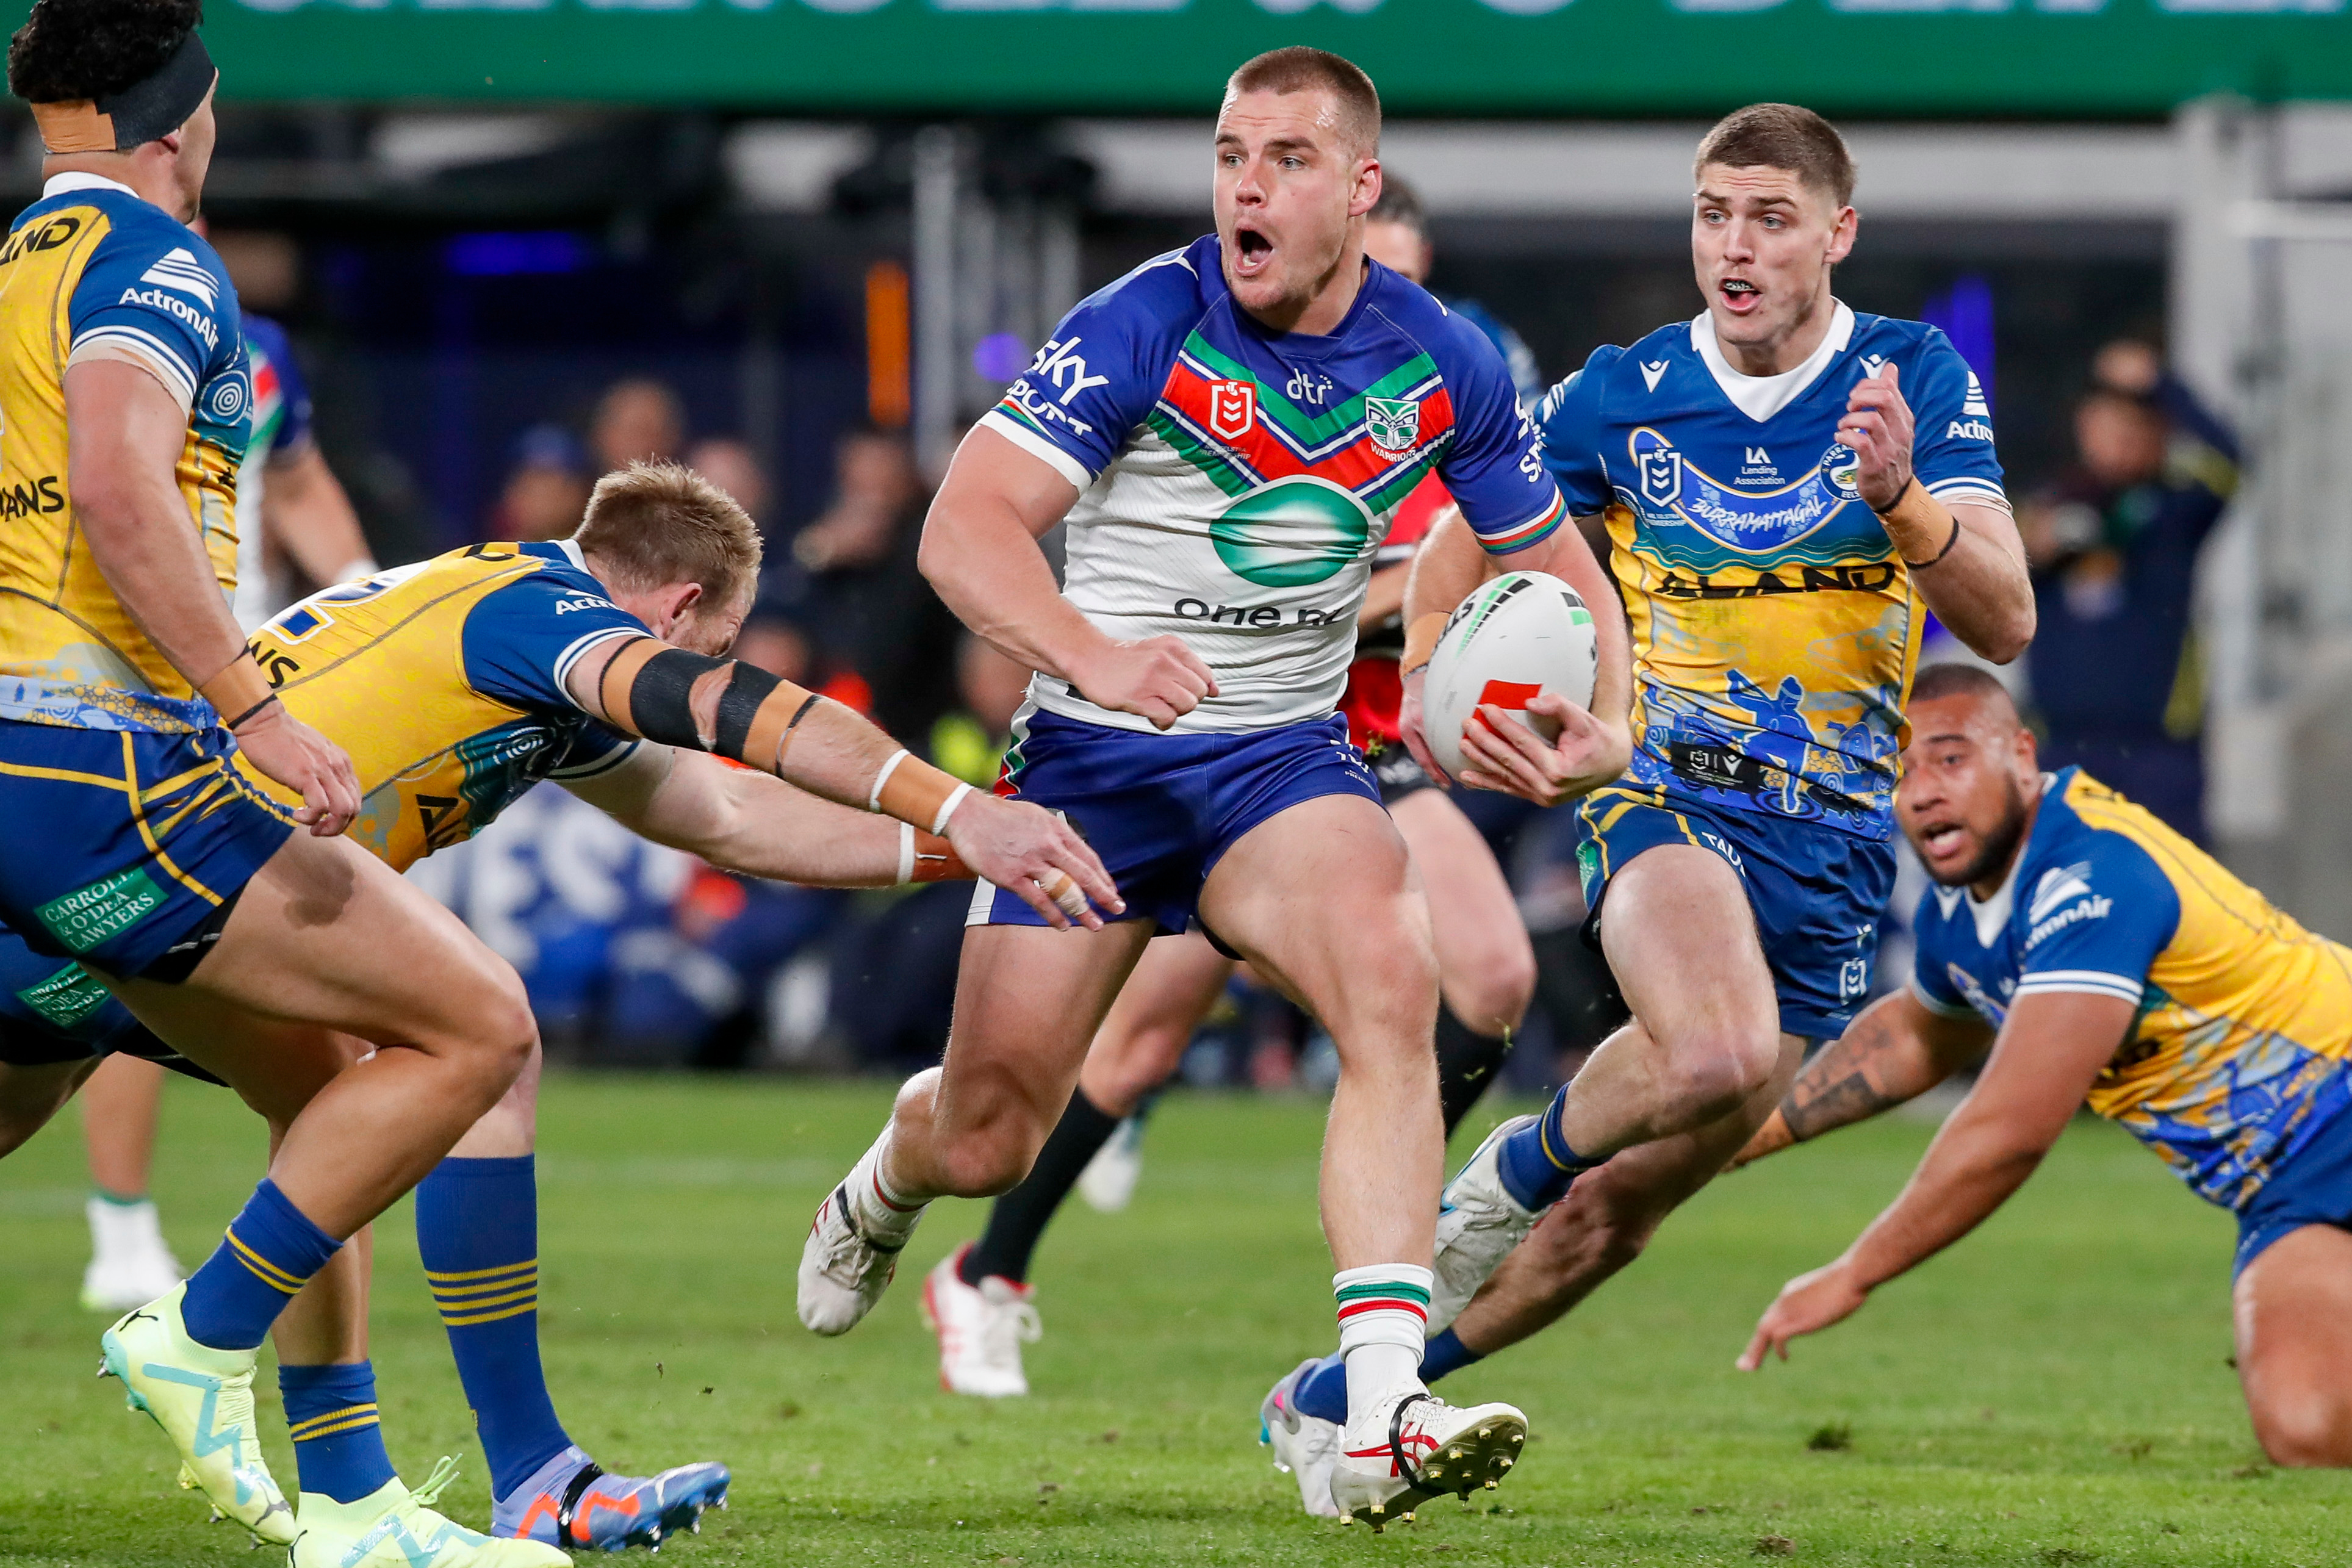 Warriors coach Andrew Webster explains surprise positional switch ahead of clash with St George Illawarra Dragons